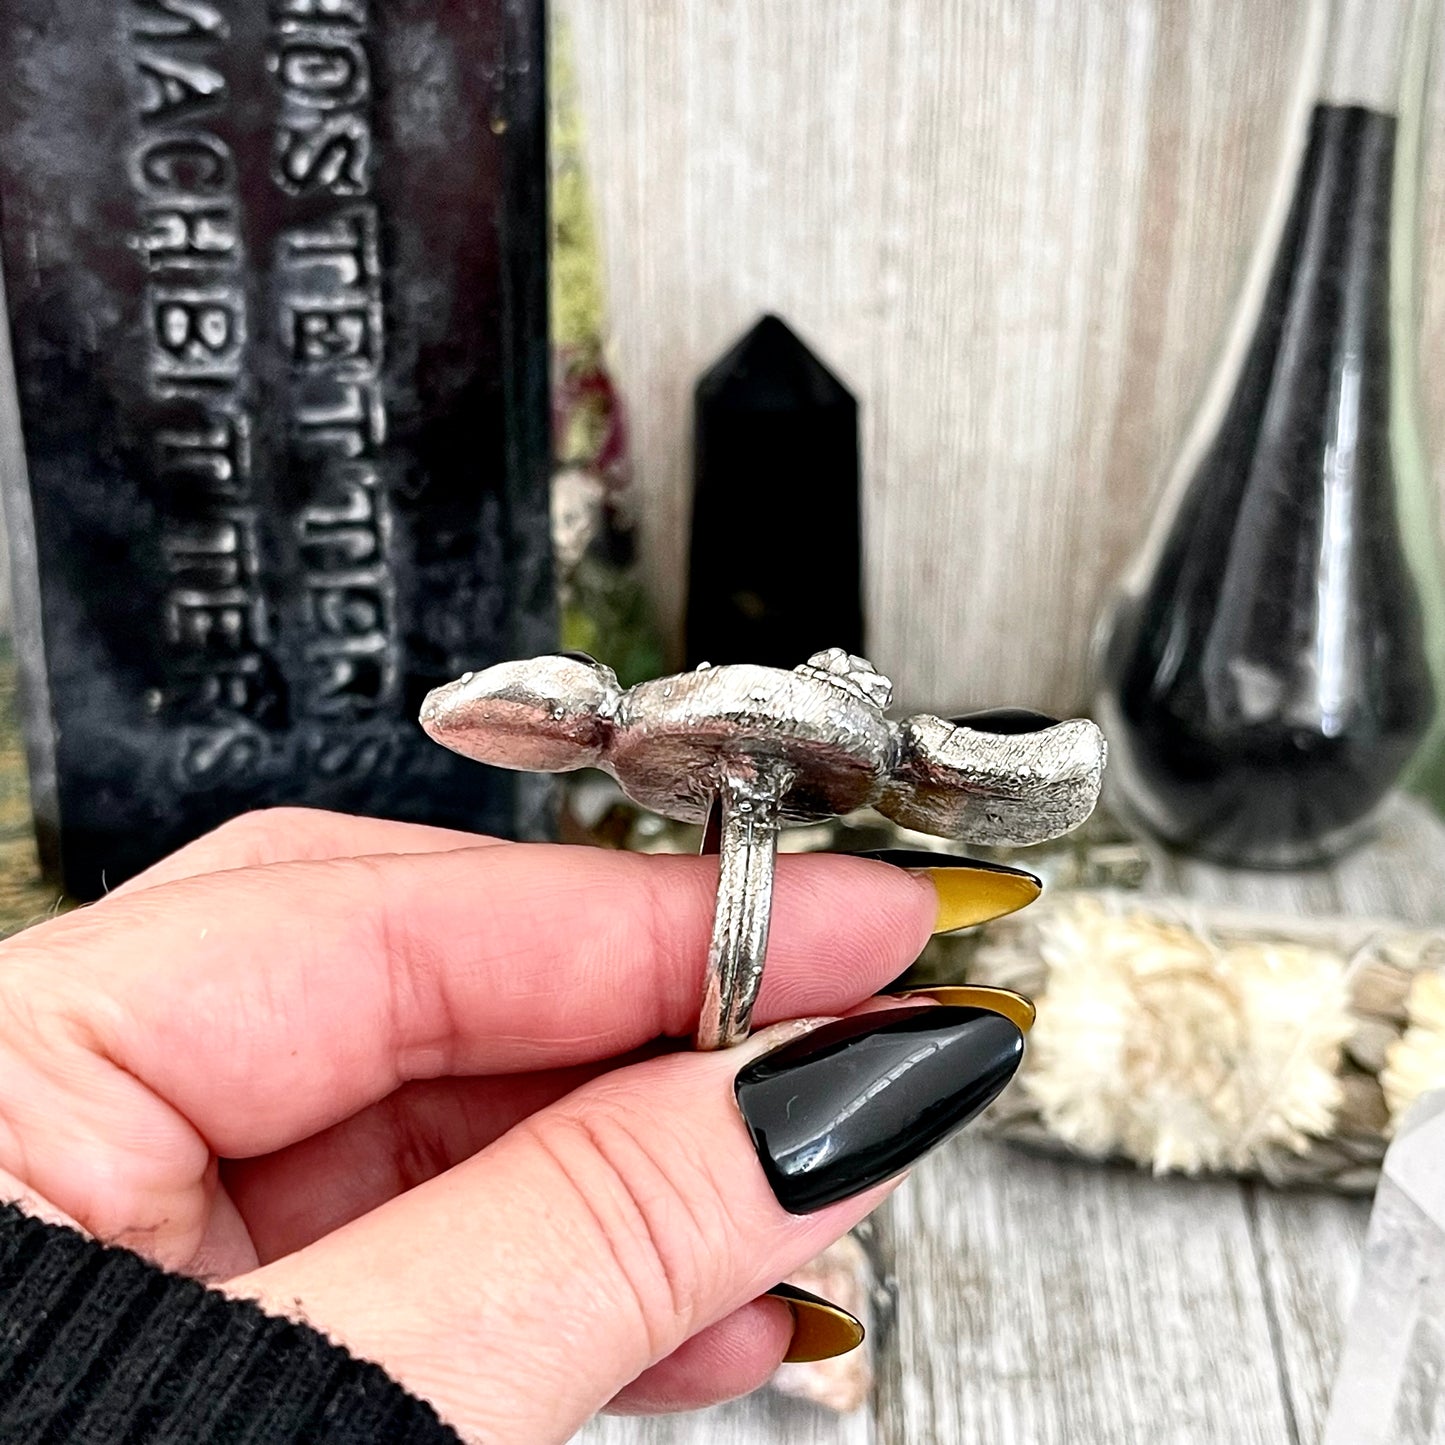 Size 8 Crystal Ring - Three Stone Ring Black Onyx Tourmaline Quartz Herkimer Diamond Ring Silver / Foxlark Collection - One of a Kind